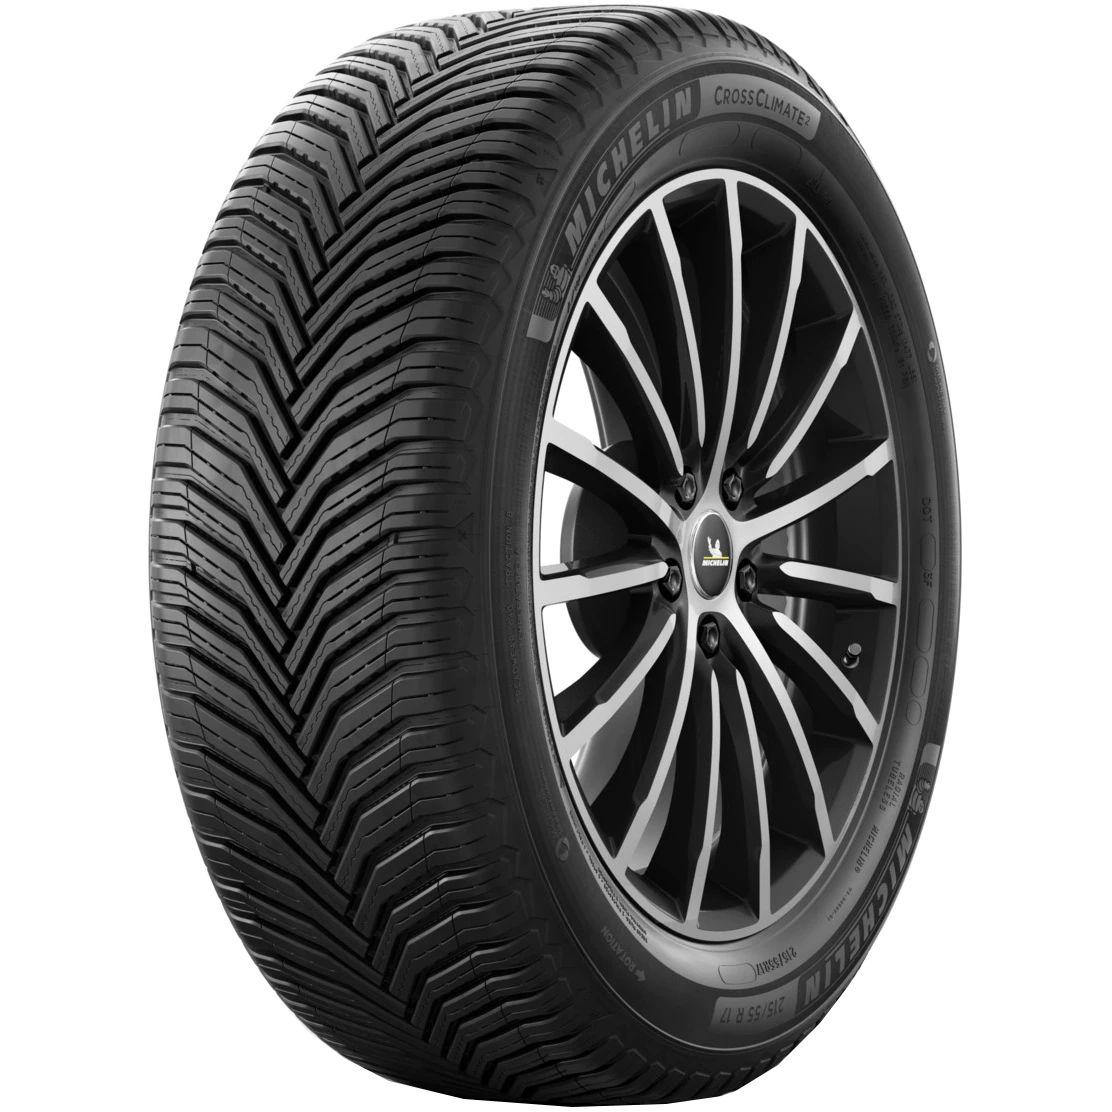 Anvelope all seasons MICHELIN CrossClimate2 Suv XL M+S 255/55 R18 109W